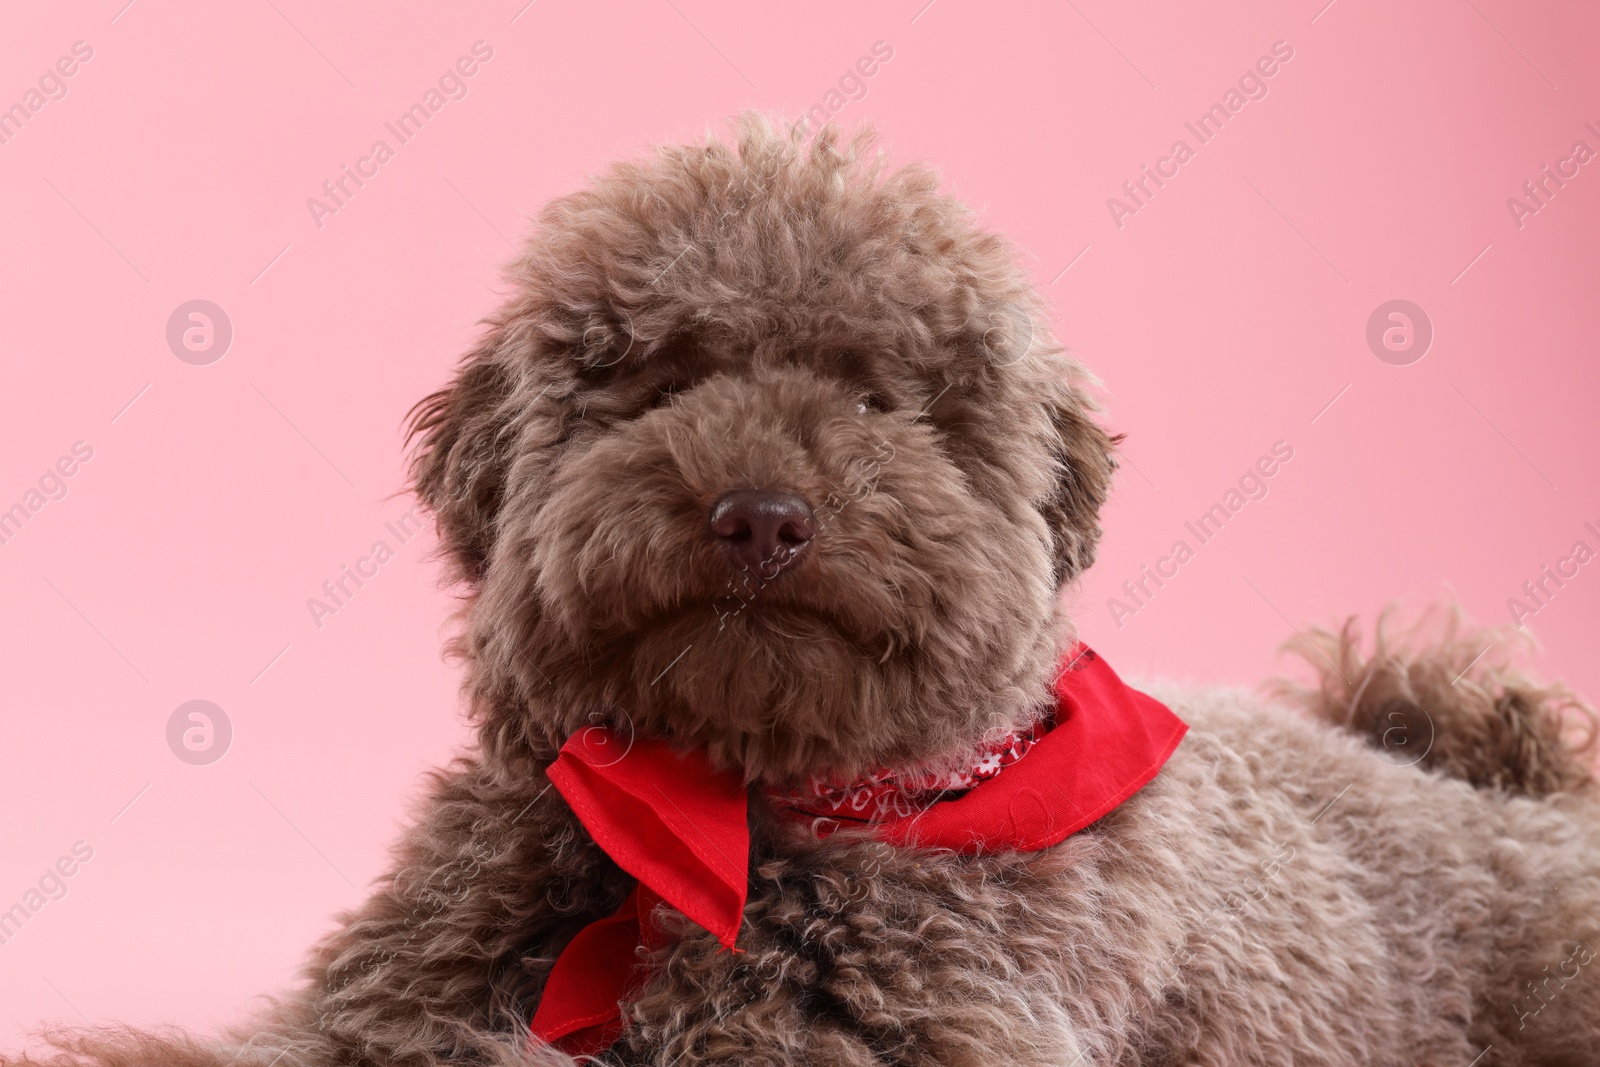 Photo of Cute Toy Poodle dog with red bandana on pink background, closeup